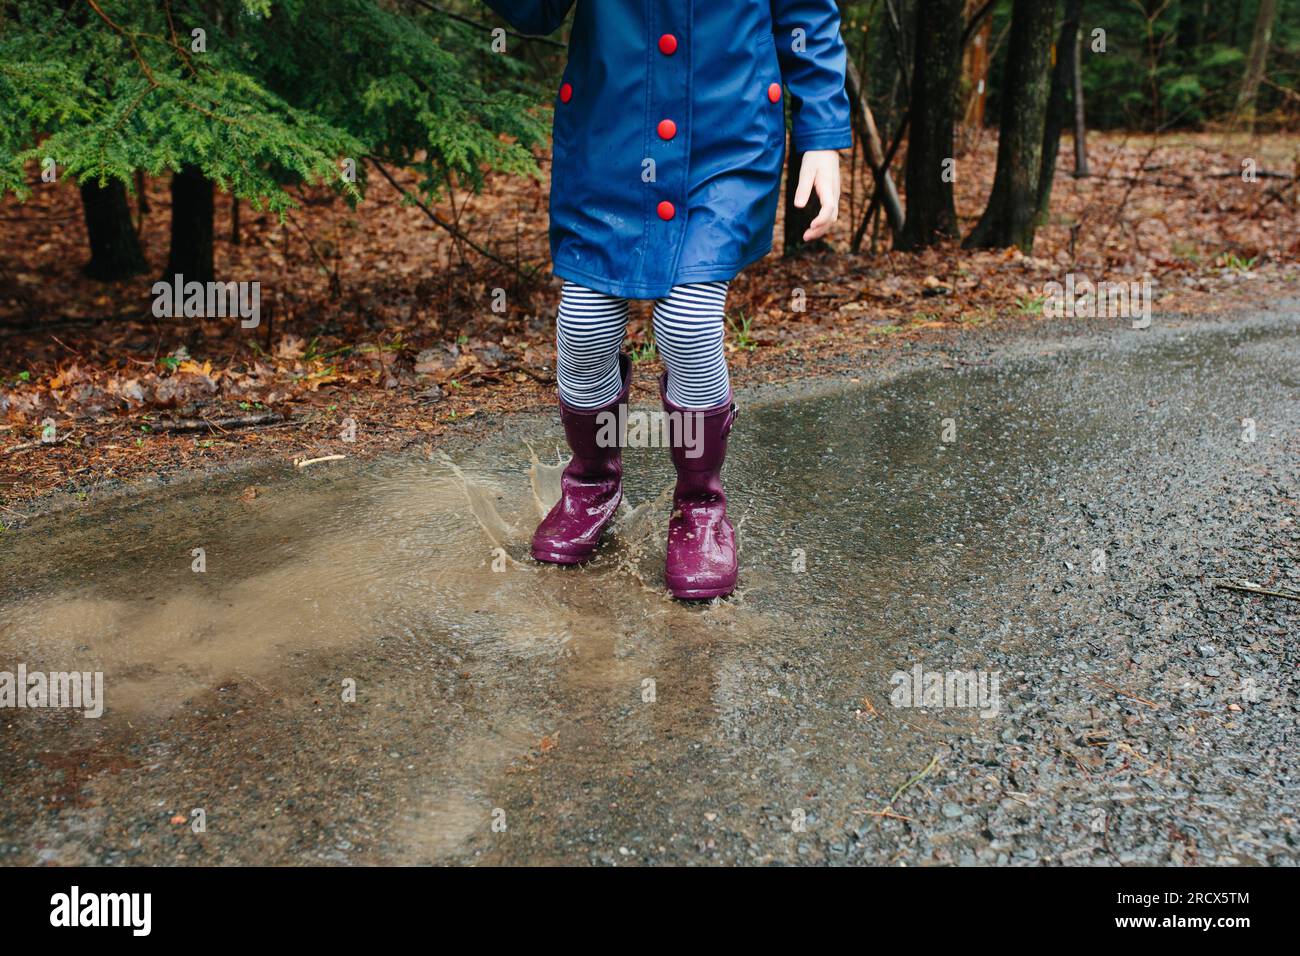 Young child's boots splashing in mud puddle. Stock Photo